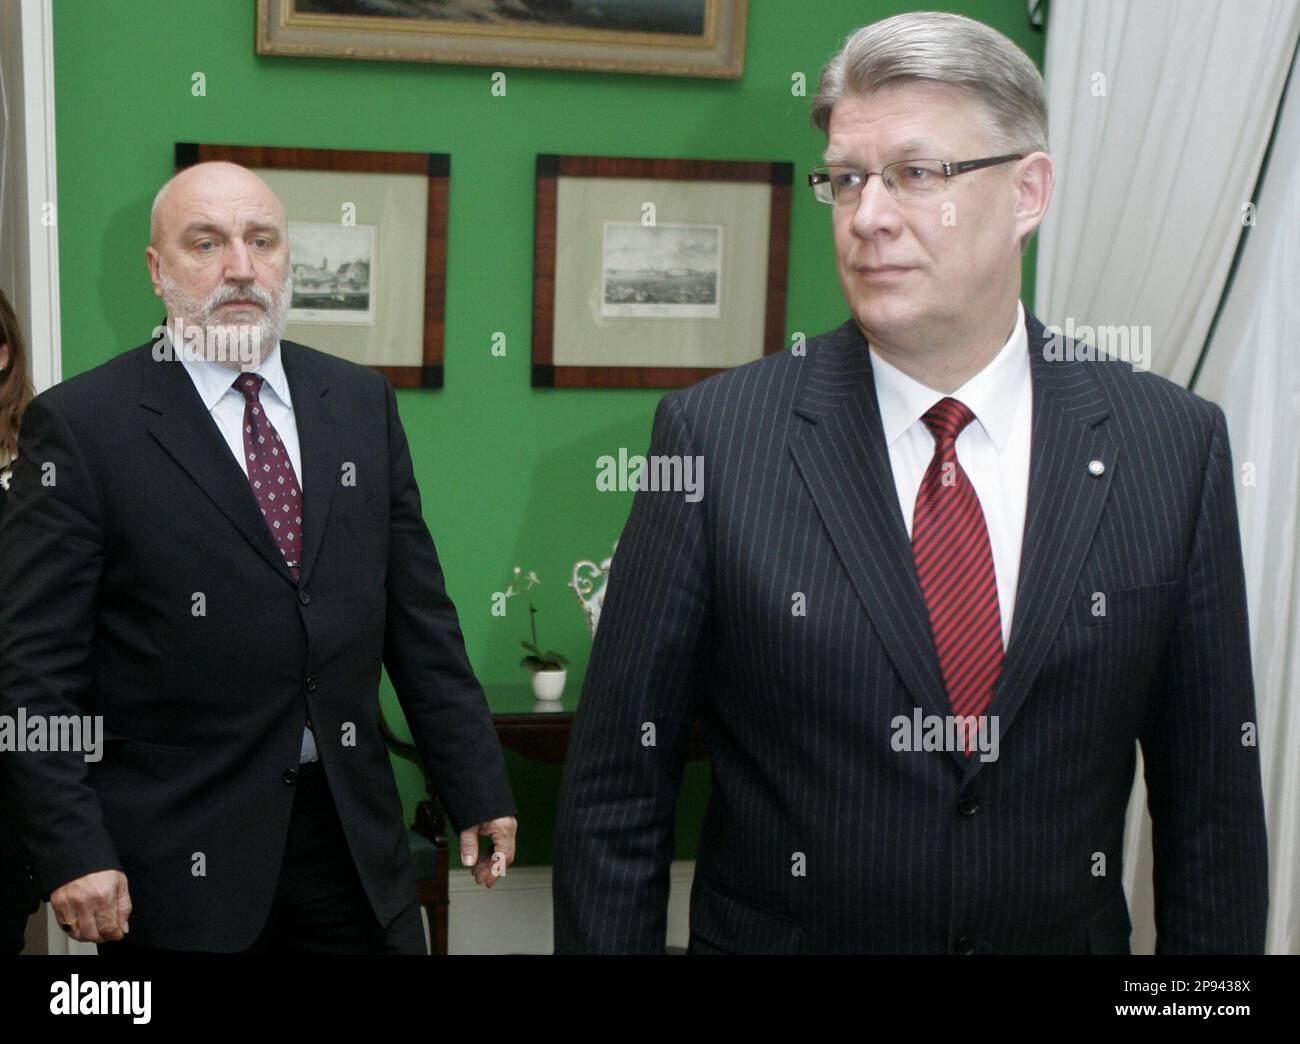 Latvian President Valdis Zatlers and Prime Minister Ivars Godmanis seen during their meeting in Riga, Latvia, Friday, Feb. 20, 2009. President Valdis Zatlers said he accepted the resignation of Prime Minister Ivars Godmanis and his administration, which had been in power since December 2007. Latvia's center-right coalition government resigned Friday after weeks of instability brought on by the Baltic country's economic collapse. (AP Photo) Stock Photo